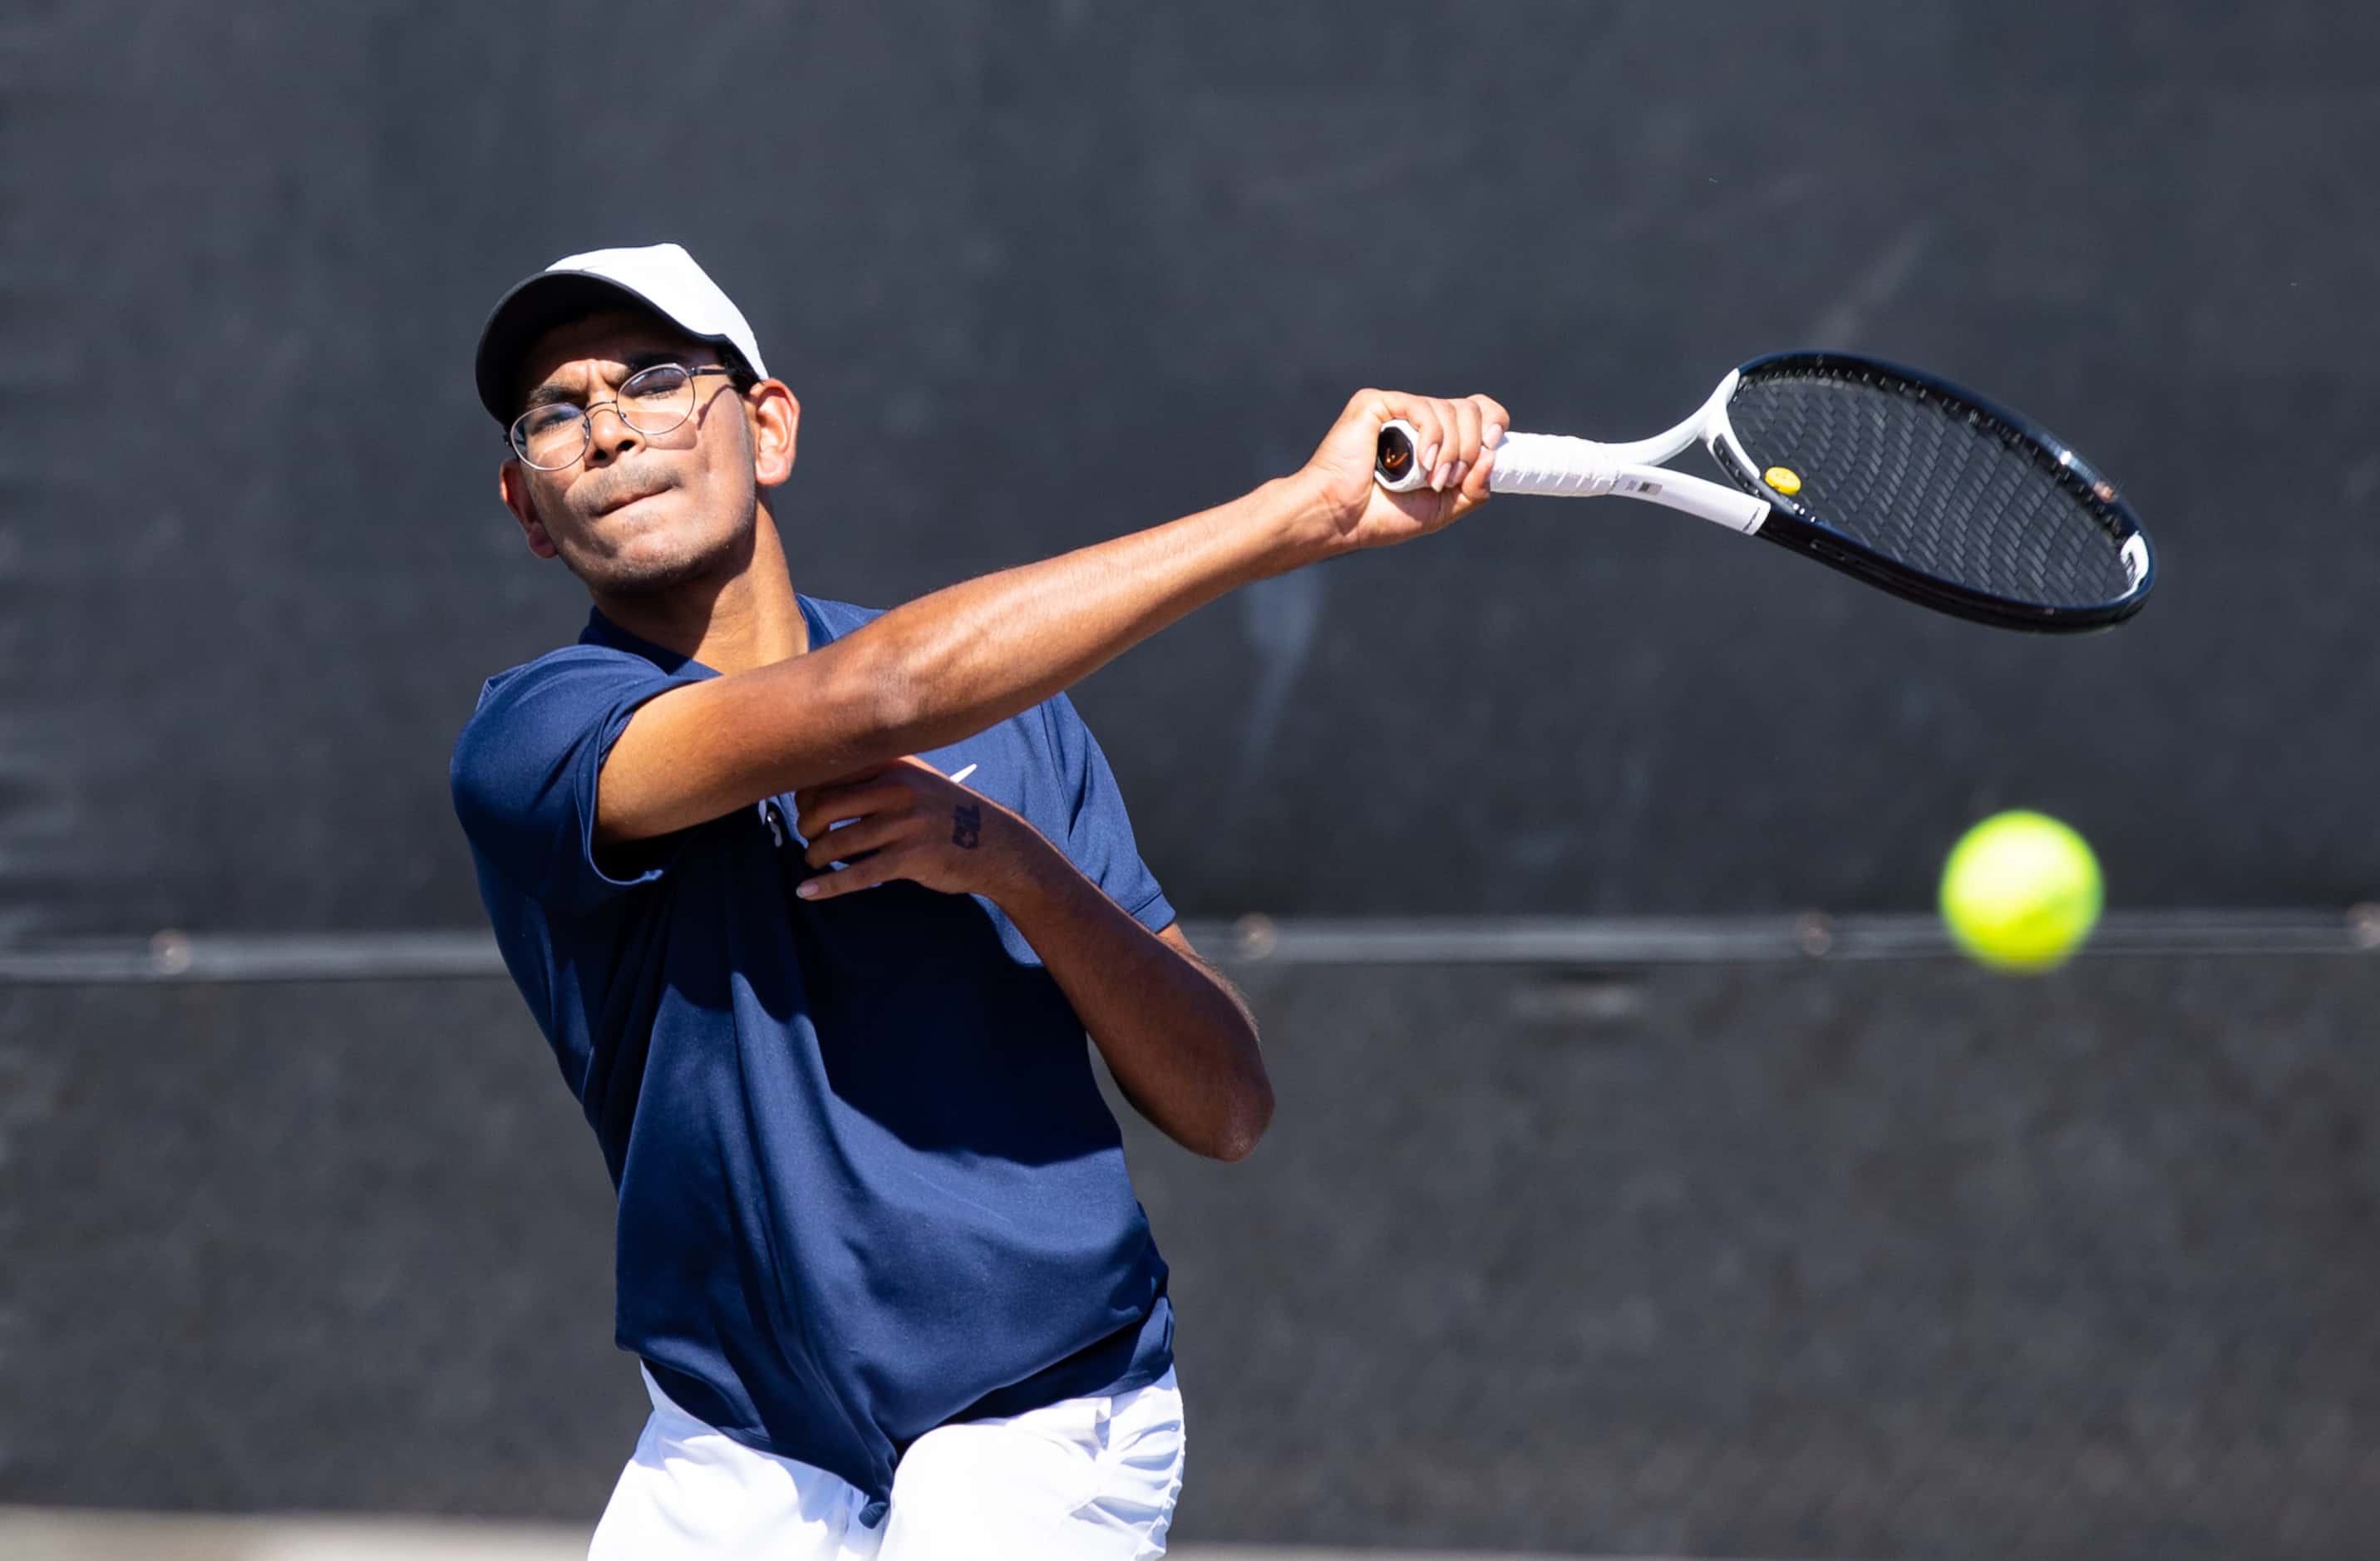 Frisco Centennial’s Tanish Gupt returns a shot during a doubles match with partner Rahul...